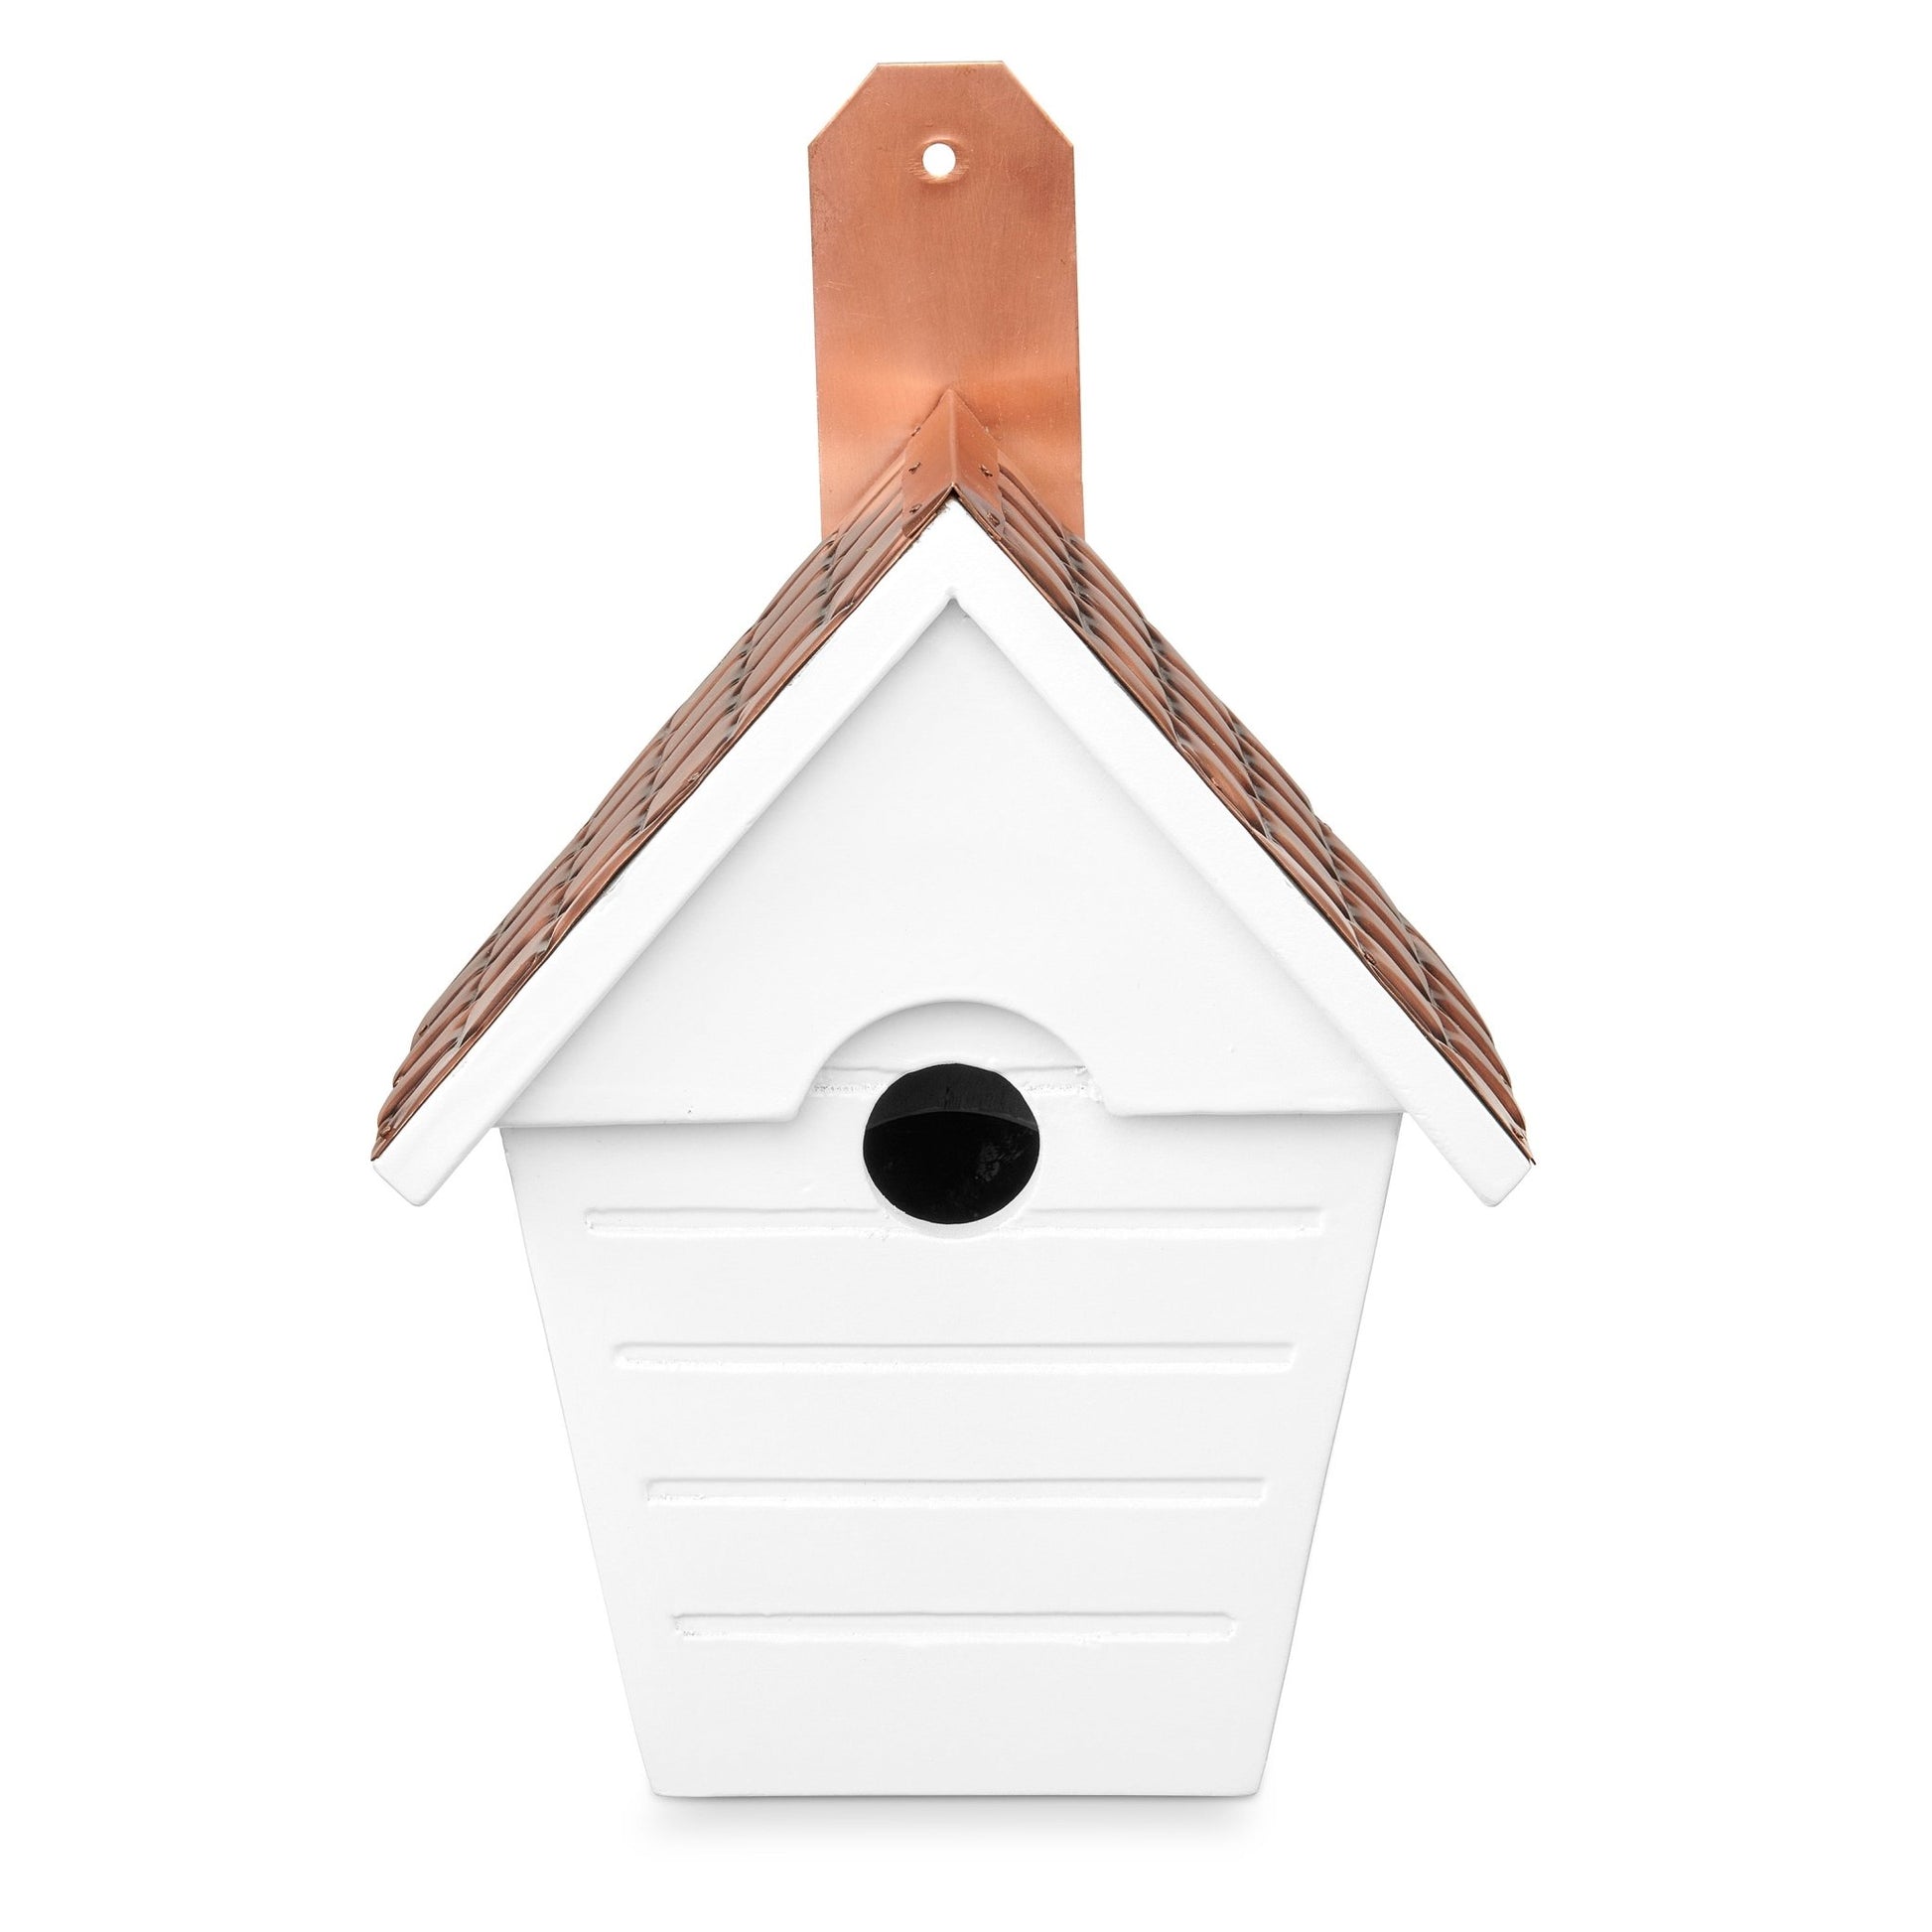 Classic Cottage Bird House – Shingled Antique Copper Roof - Good Directions